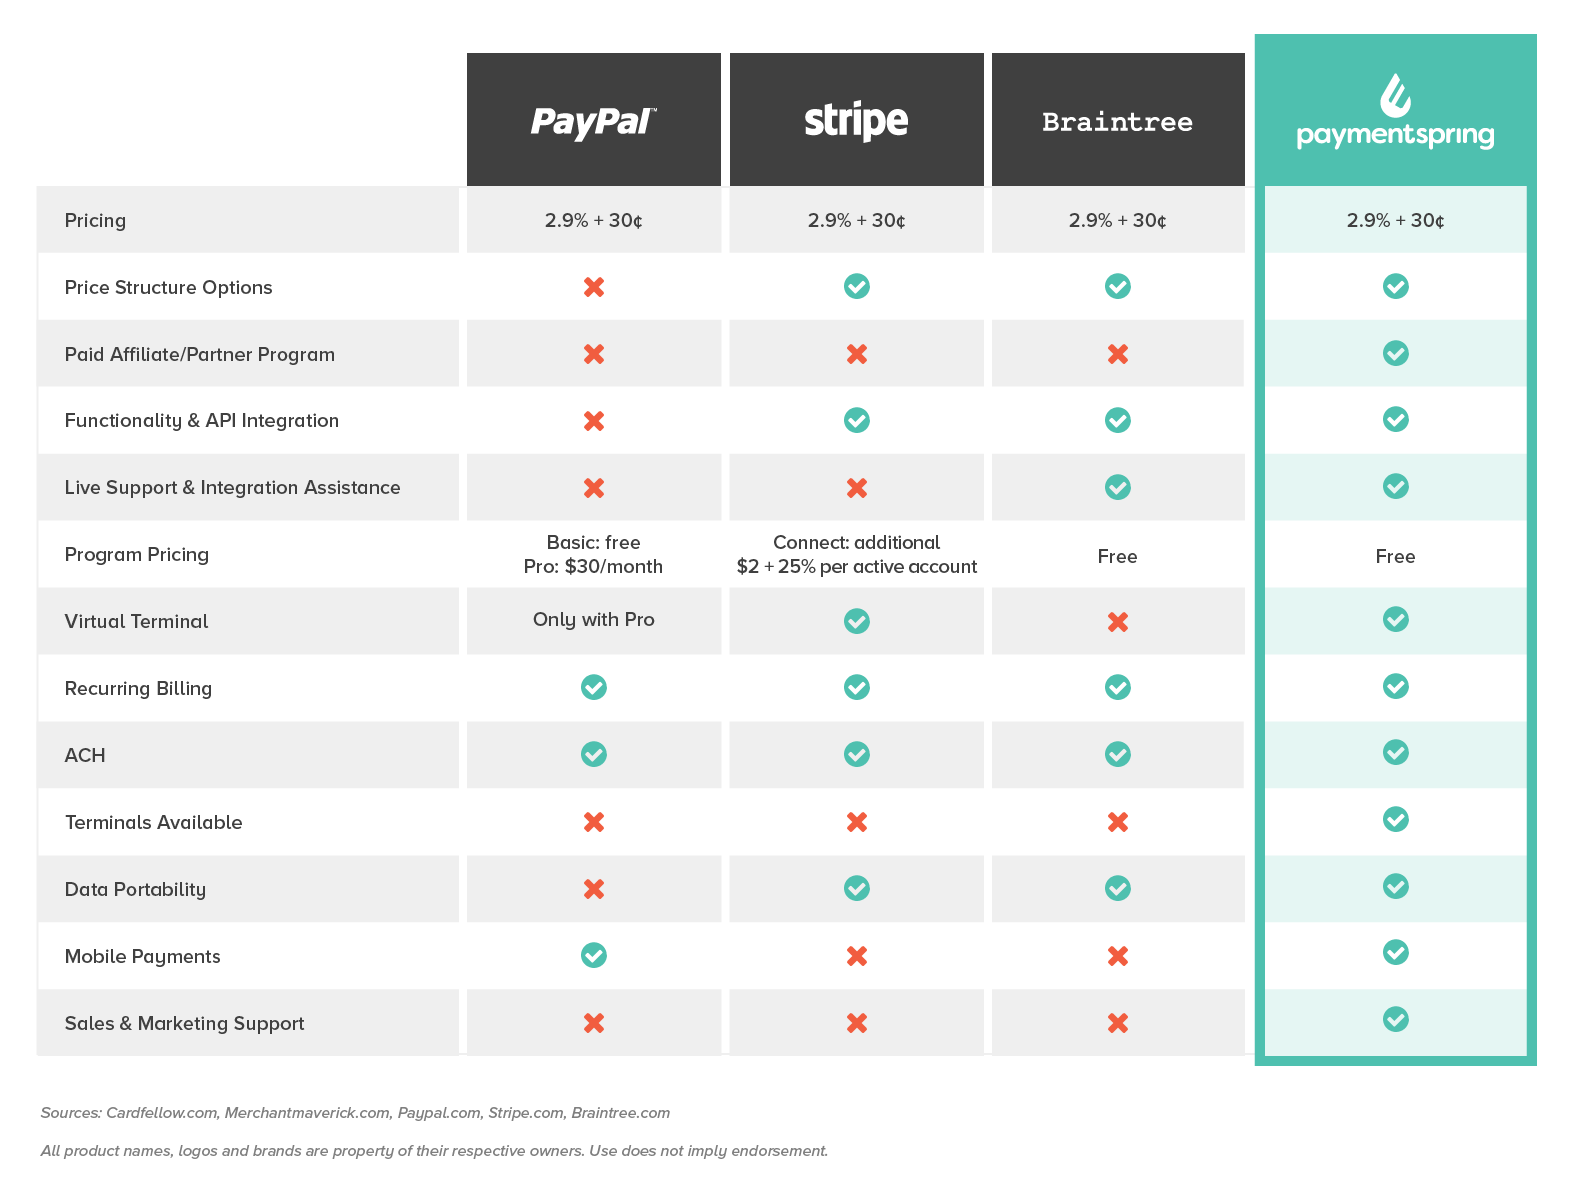 25 by 25 We Accept PayPal Logo - PaymentSpring vs. PayPal vs. Stripe vs. Braintree - How We Stack Up